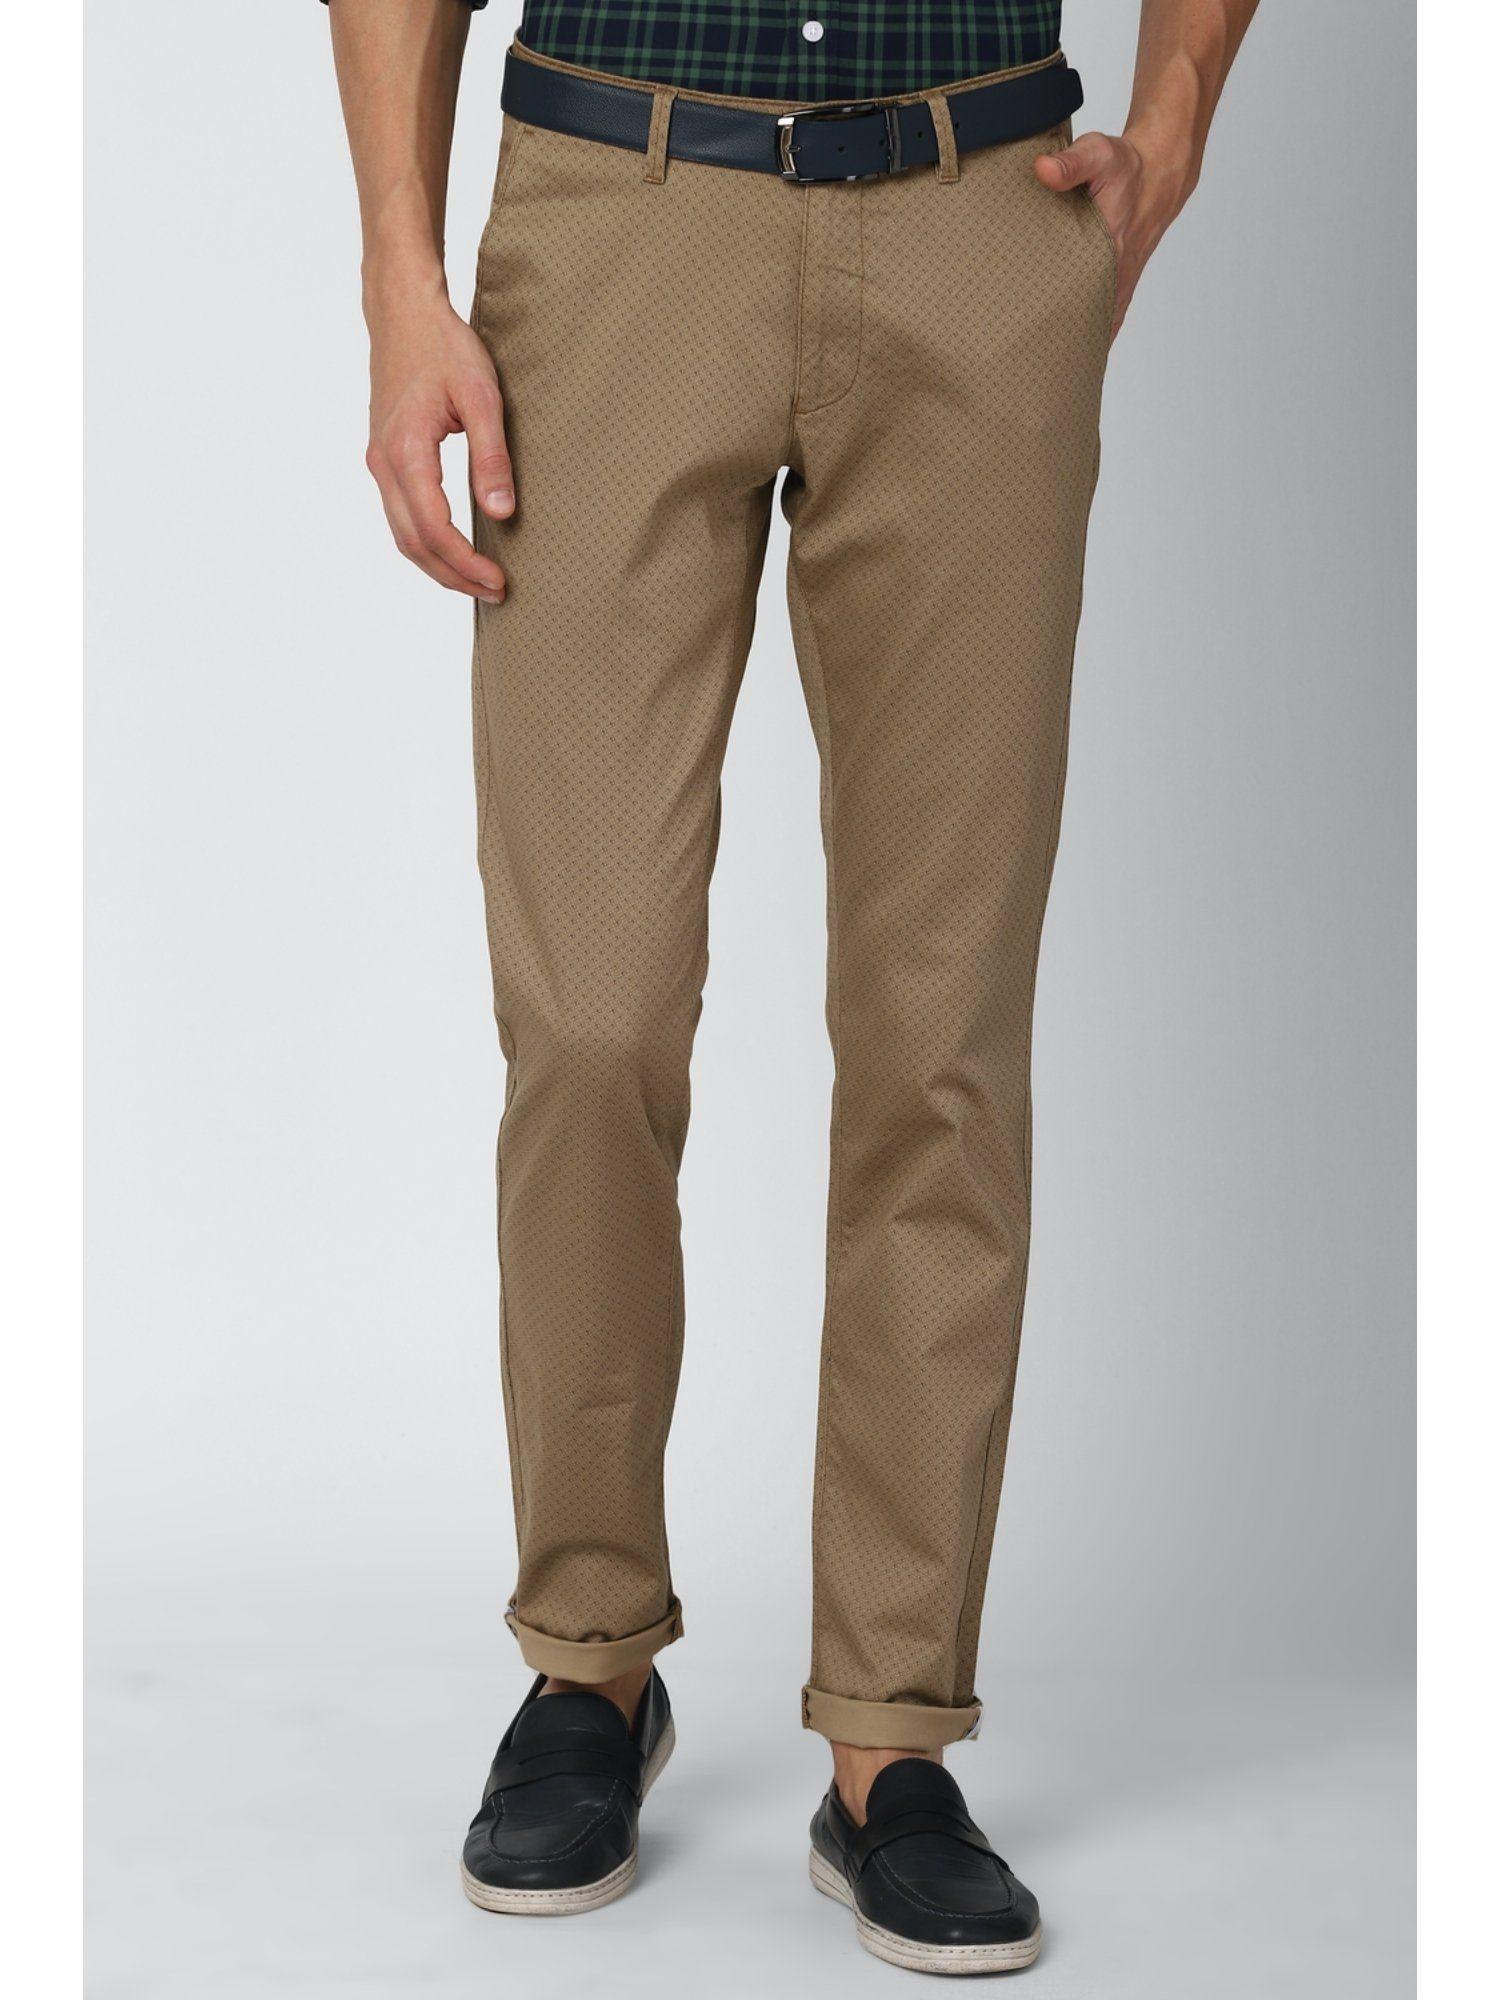 brown-casual-trouser